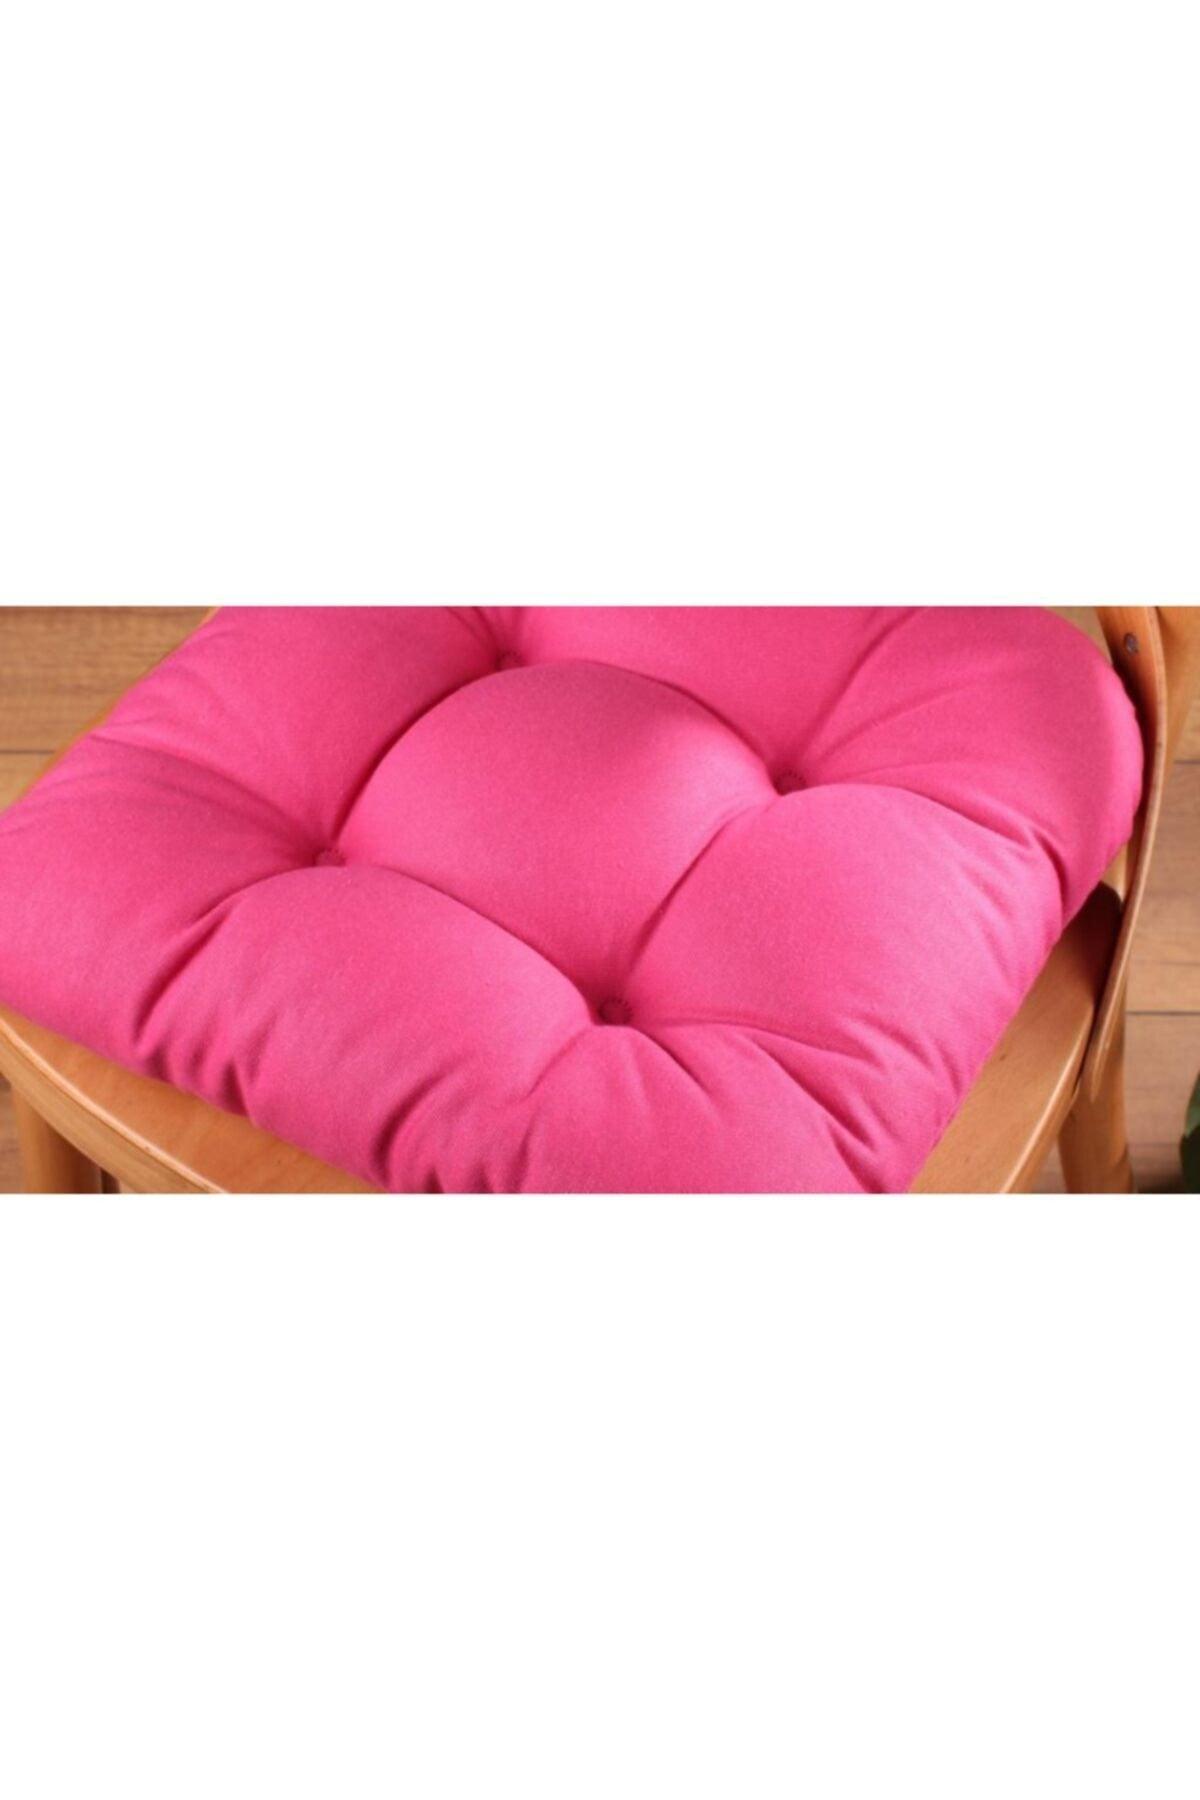 4 Pcs Lux Pofidic Fuchsia Chair Cushion Special Stitched Laced 40x40cm - Swordslife